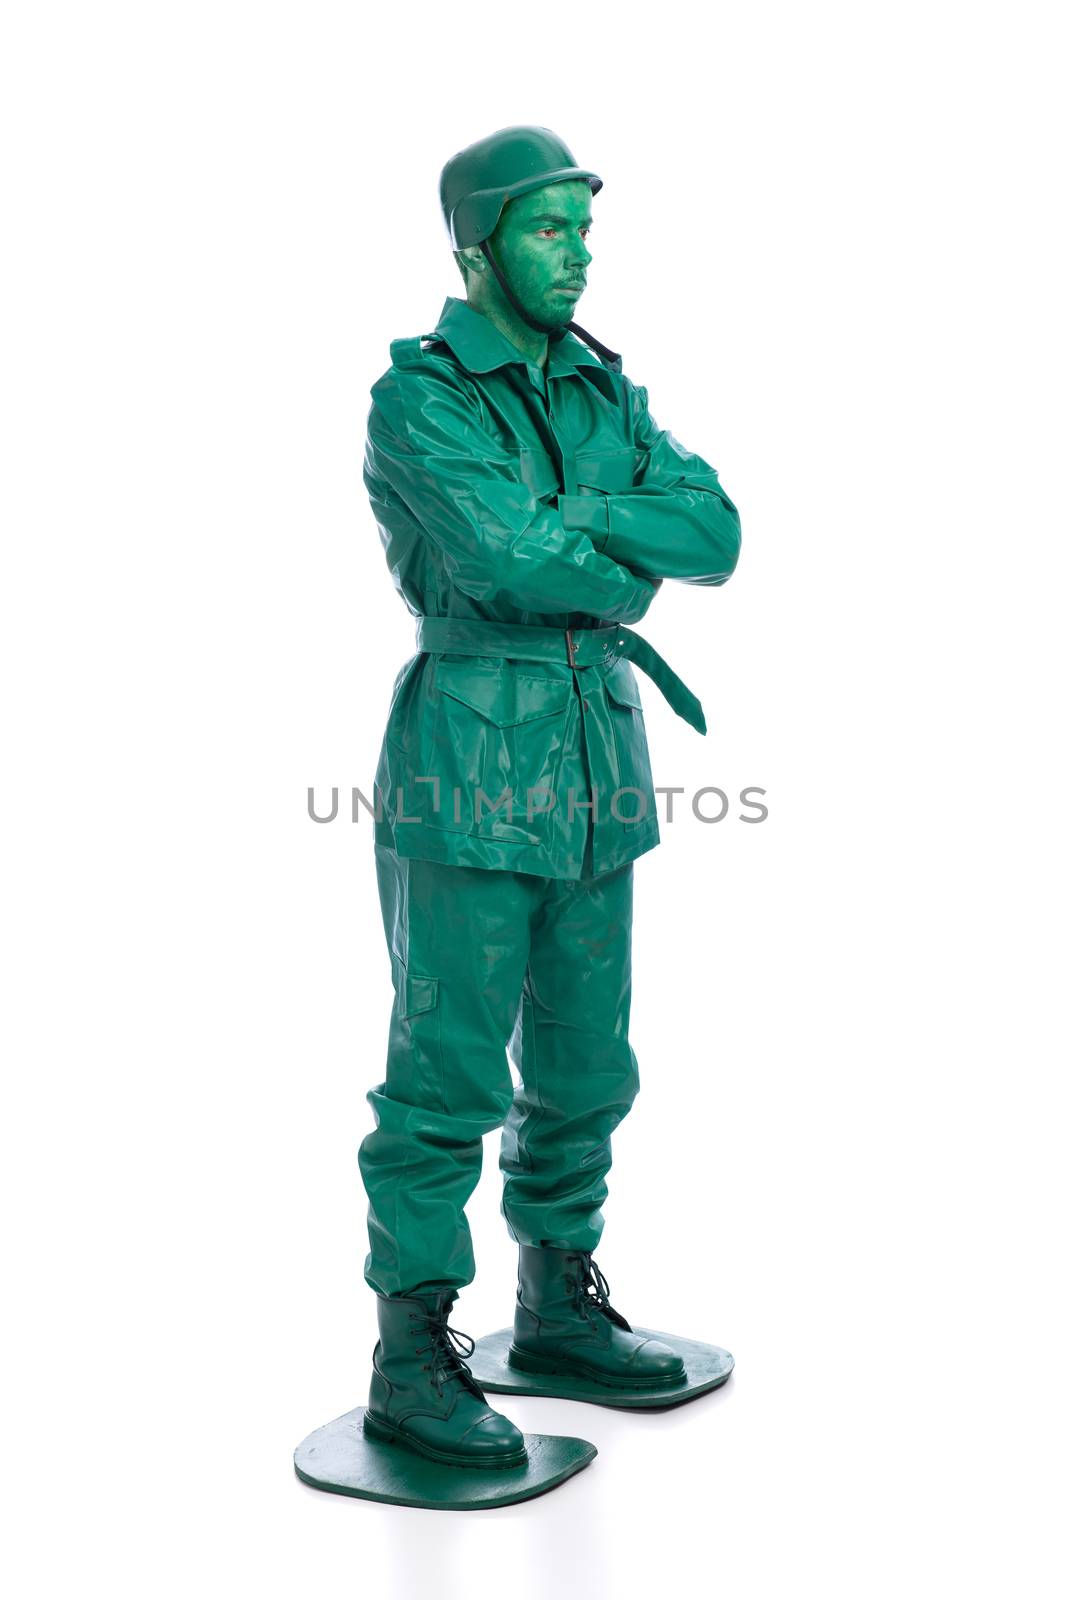 Man on a green toy soldier costume with arms crossed isolated on white background.